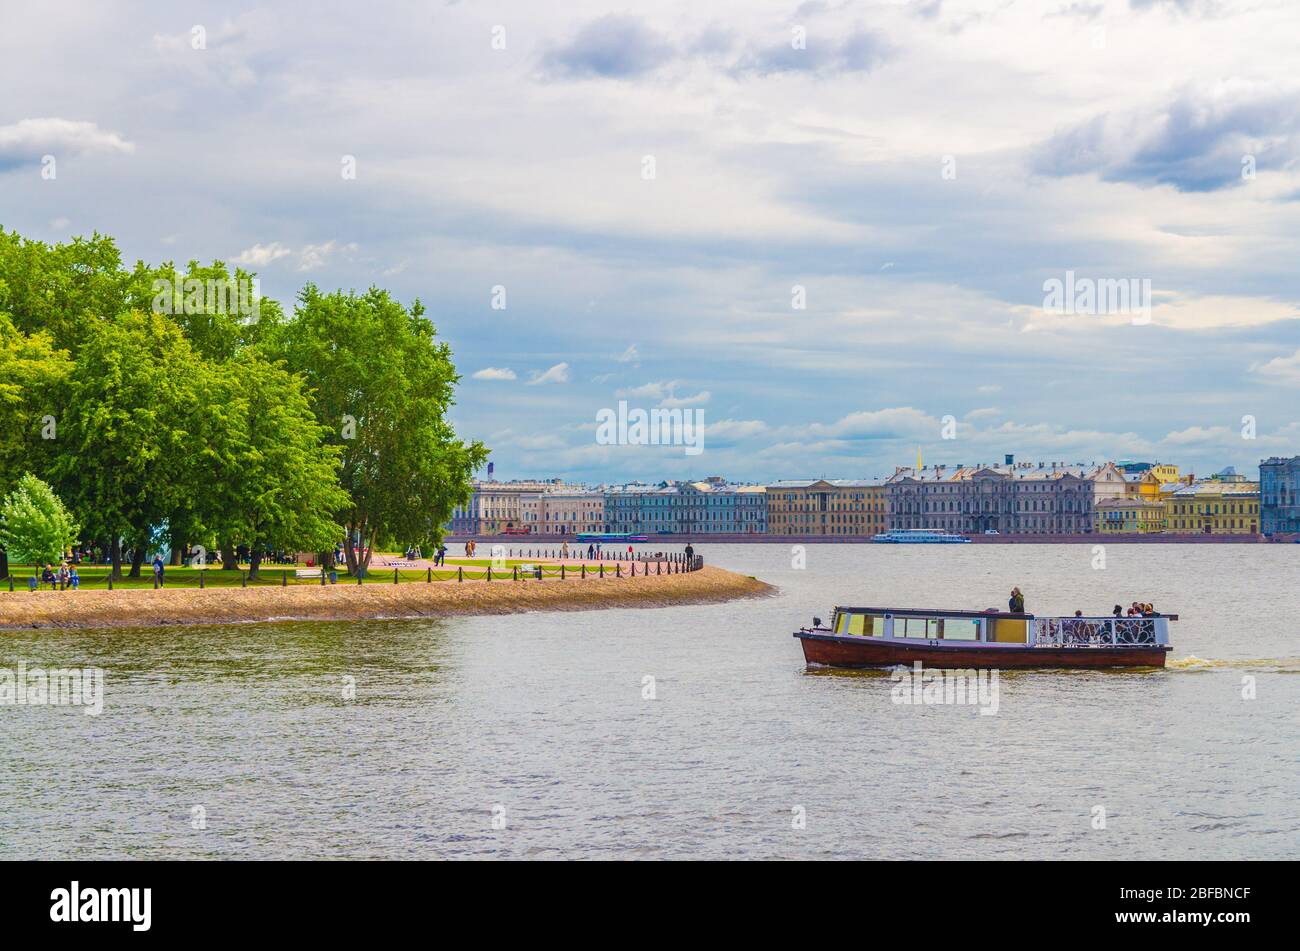 Cityscape of Saint Petersburg Leningrad city with row of old colorful buildings on embankment and boat ship on water of Neva river near Zayachy Hare I Stock Photo